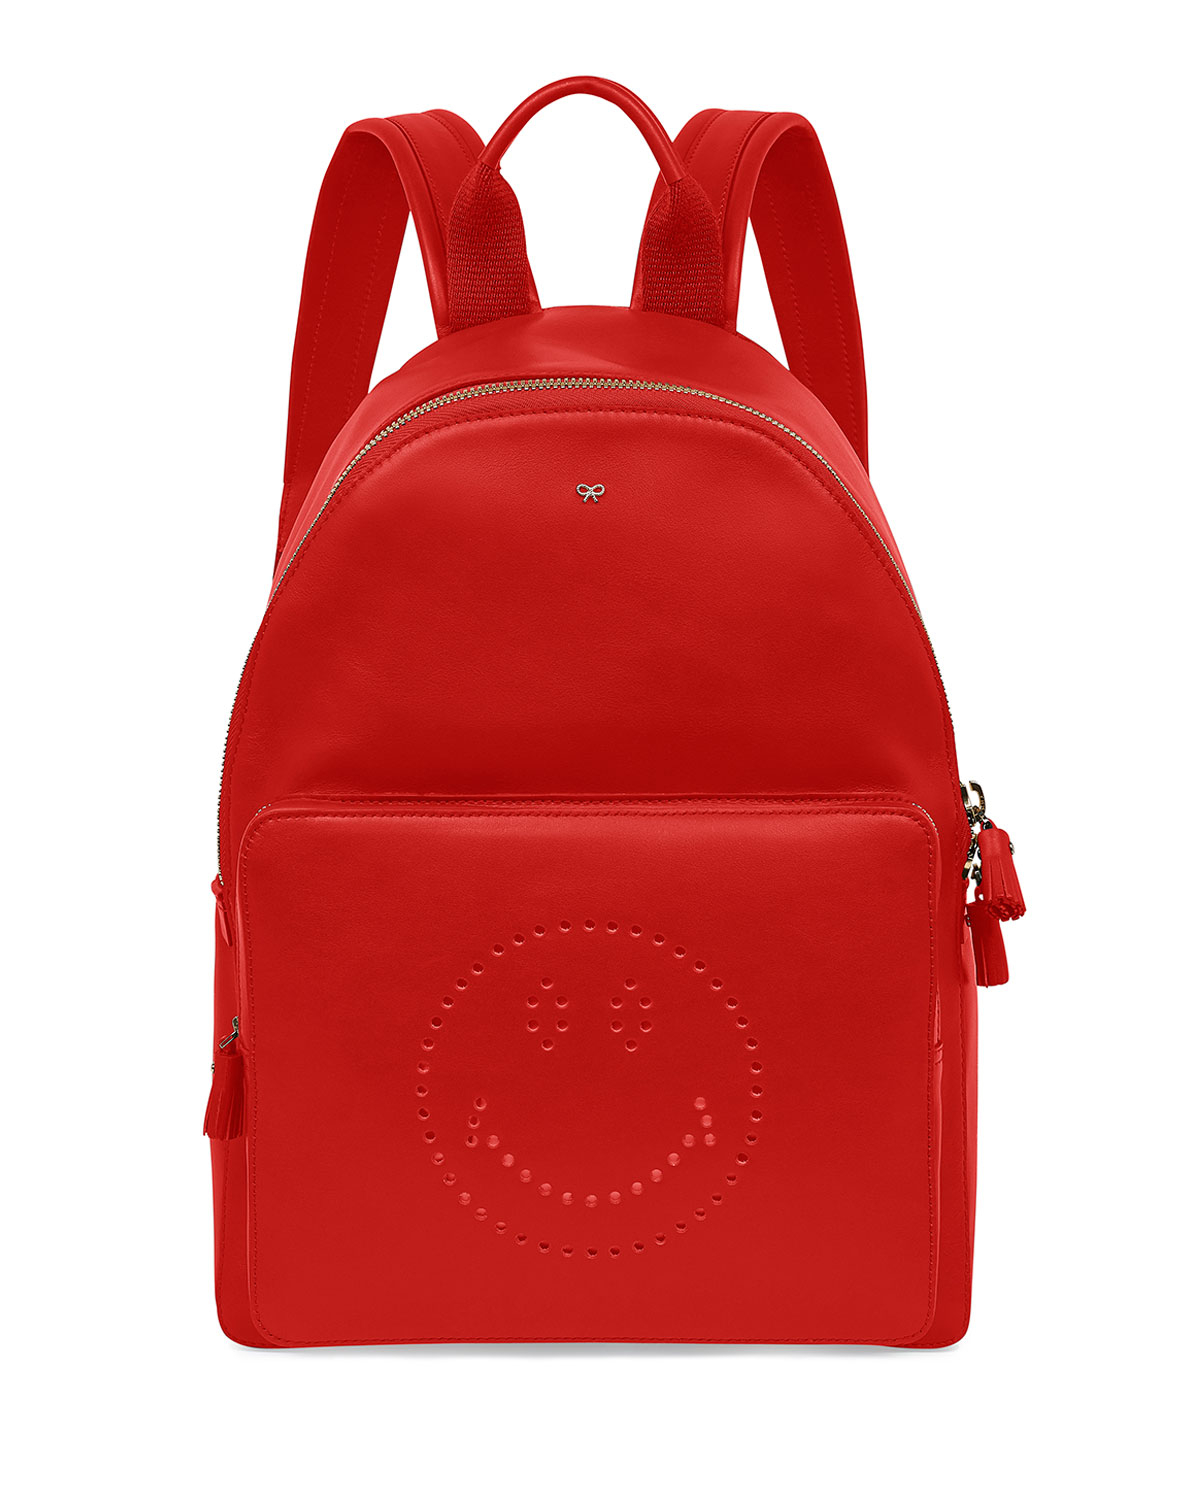 Lyst - Anya hindmarch Smiley Leather Backpack in Red